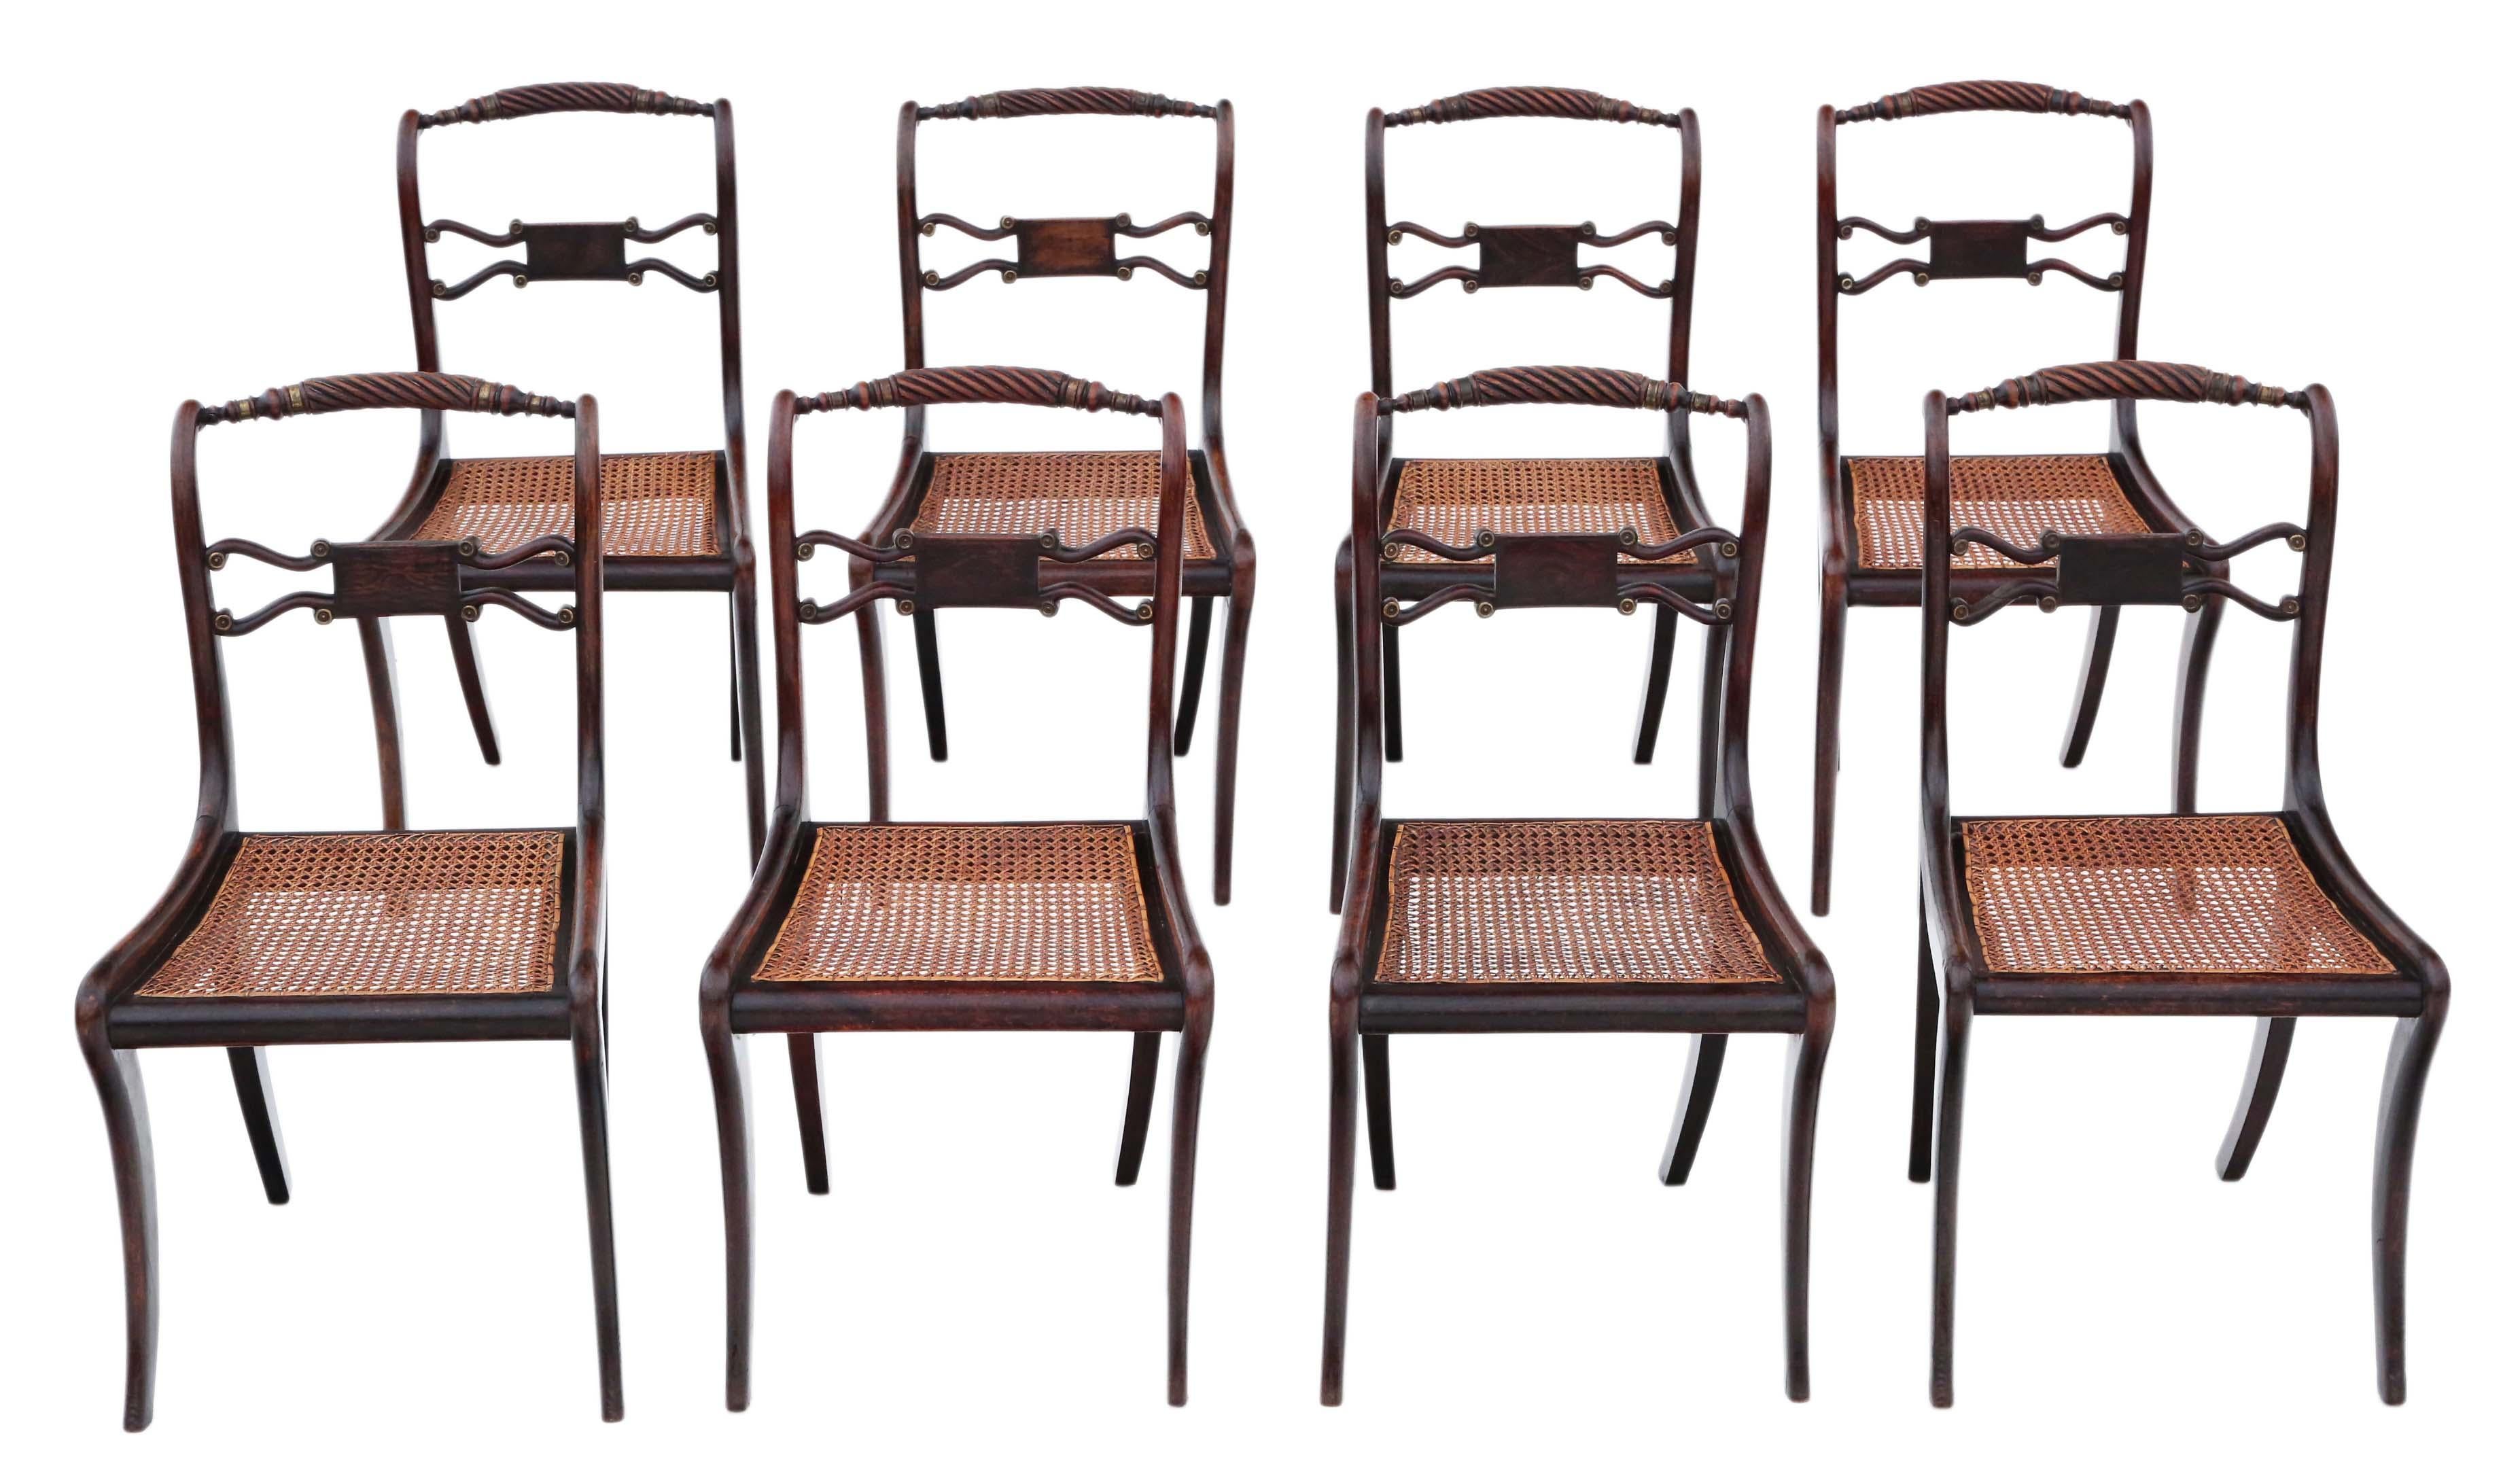 Explore the rare elegance of this exquisite set of 8 Regency faux rosewood dining chairs from the early 19th Century, circa 1825. These chairs boast a stunning color and patina, with desirable sabre front legs that add to their allure.

Crafted with